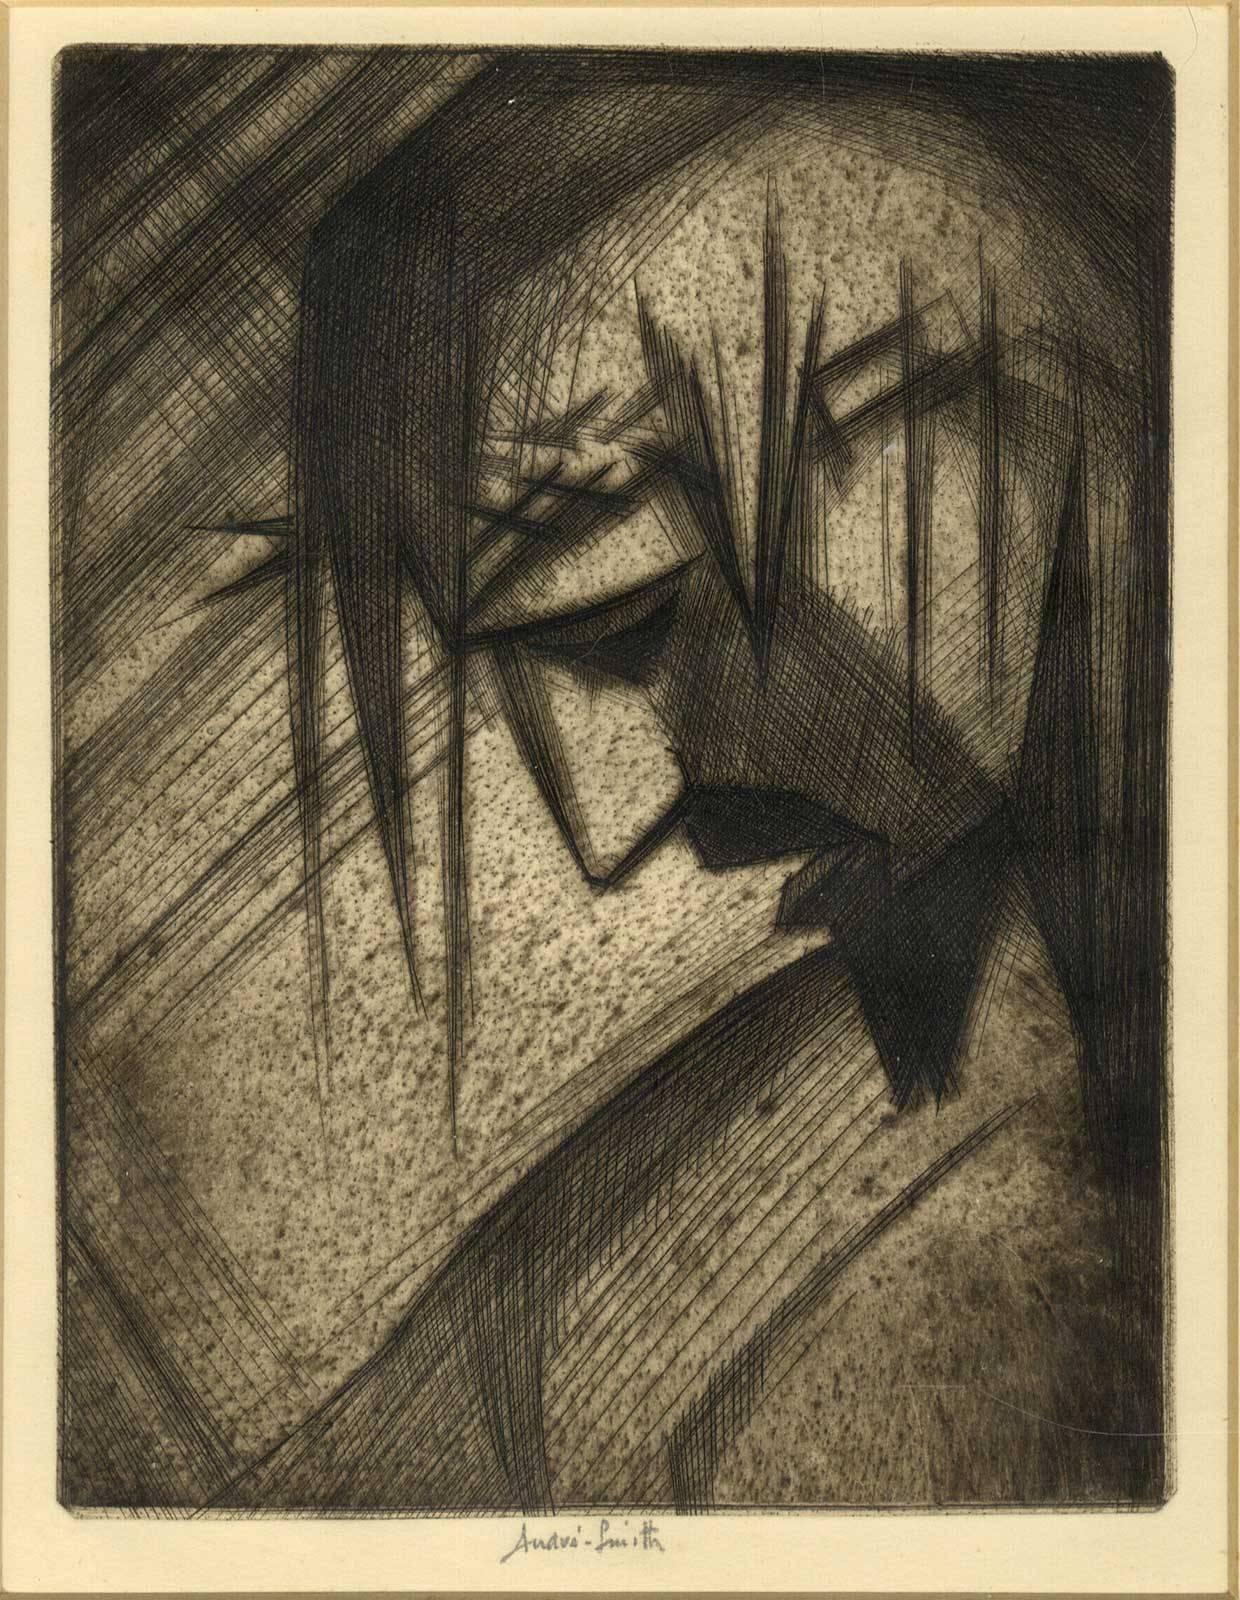 Man of Sorrows ( GOOD FRIDAY stylized side profile of Christ in crown of thorns) - Print by André Smith